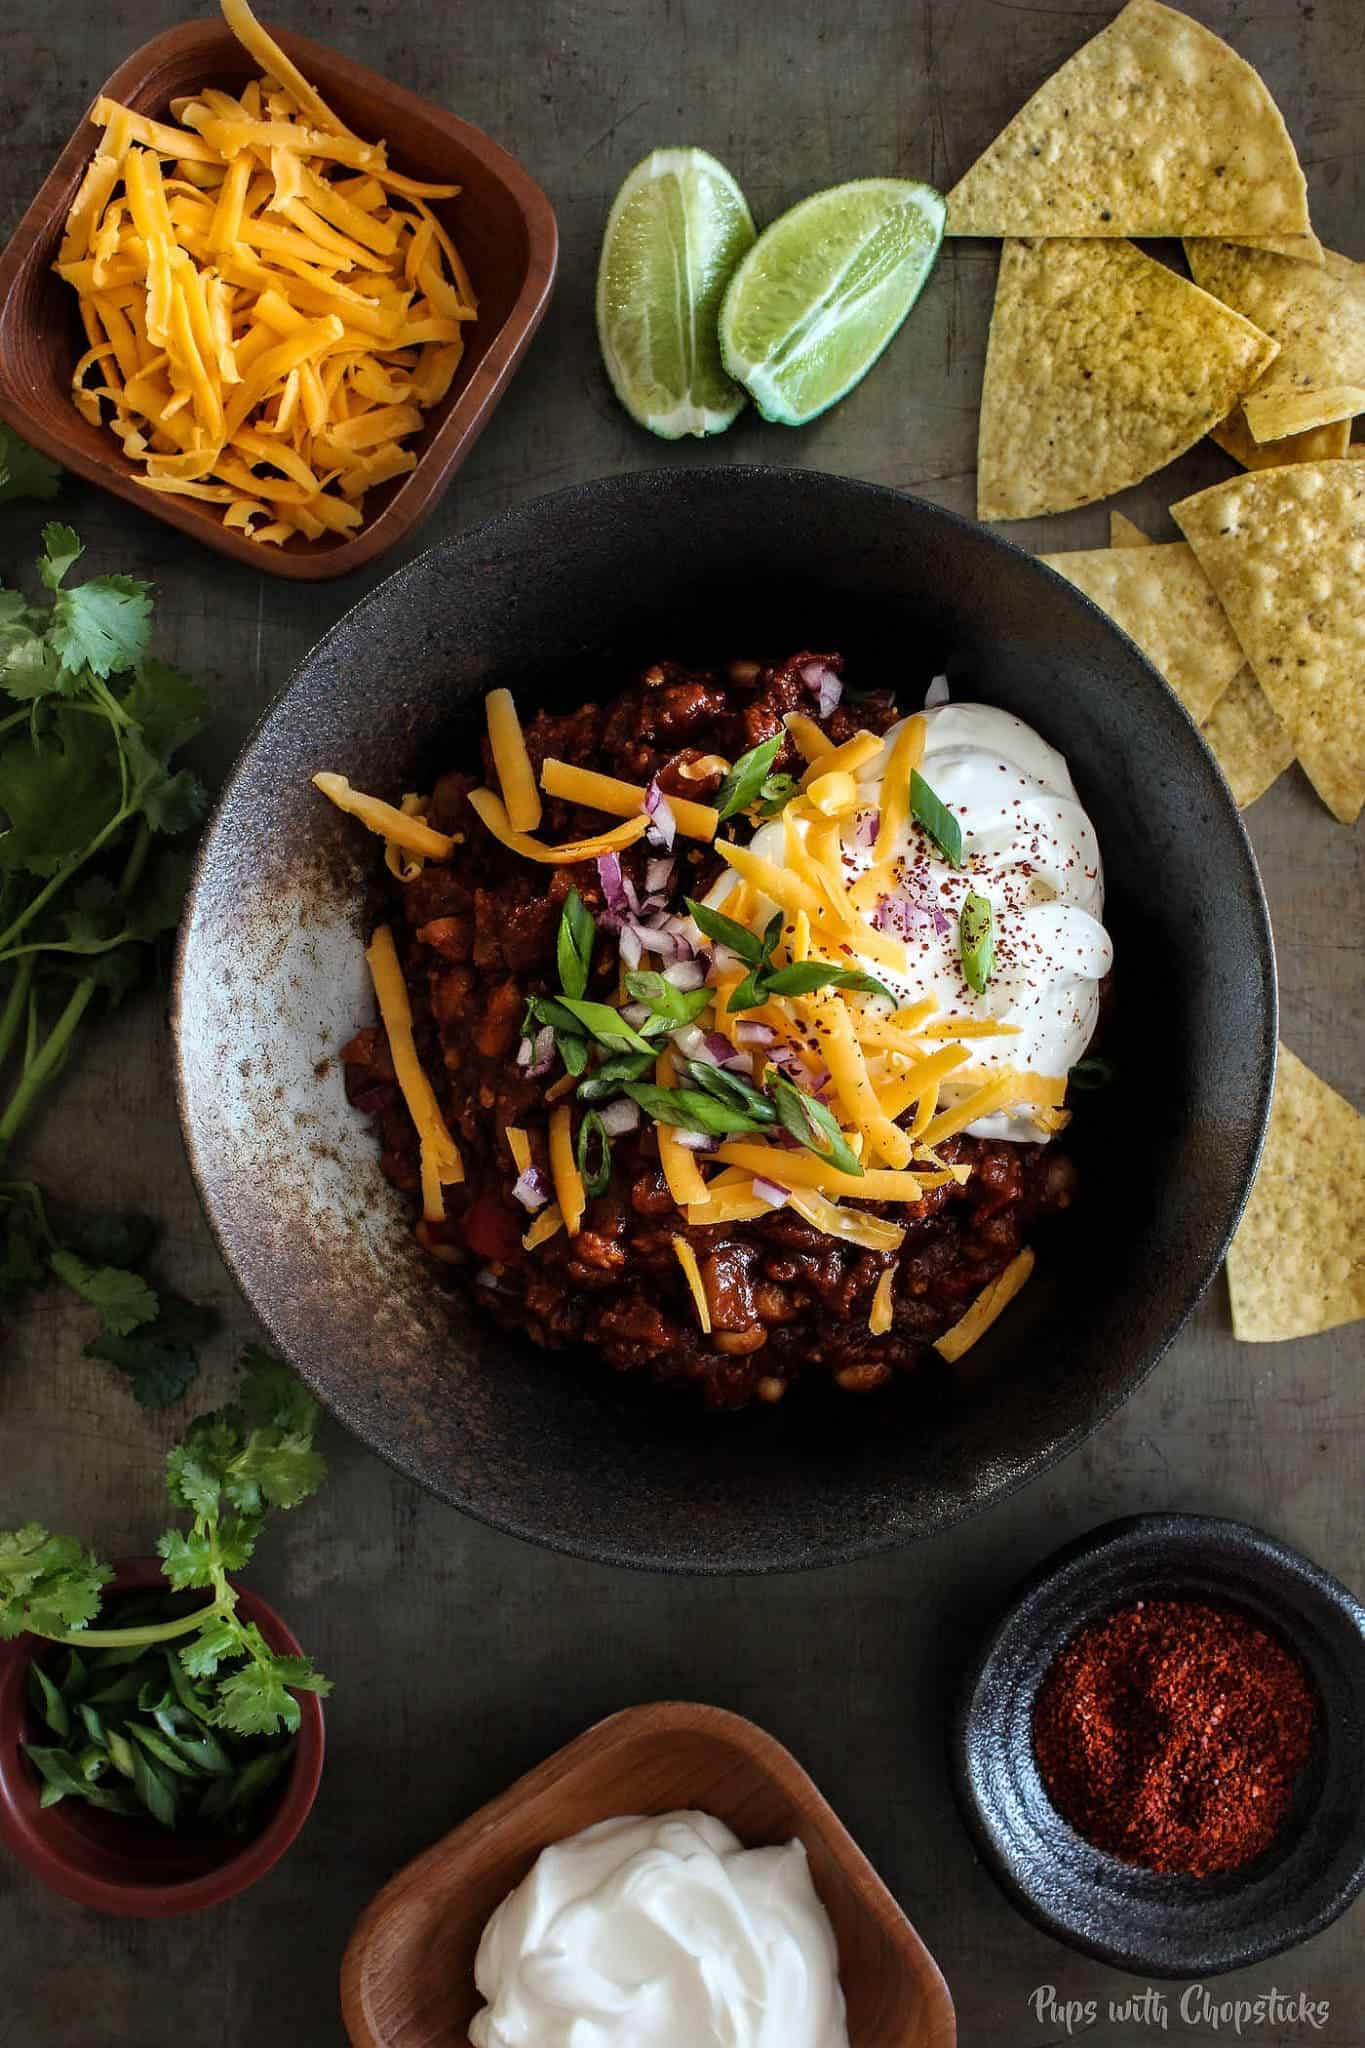 Pineapple Chipotle Chili by Pups with Chopsticks